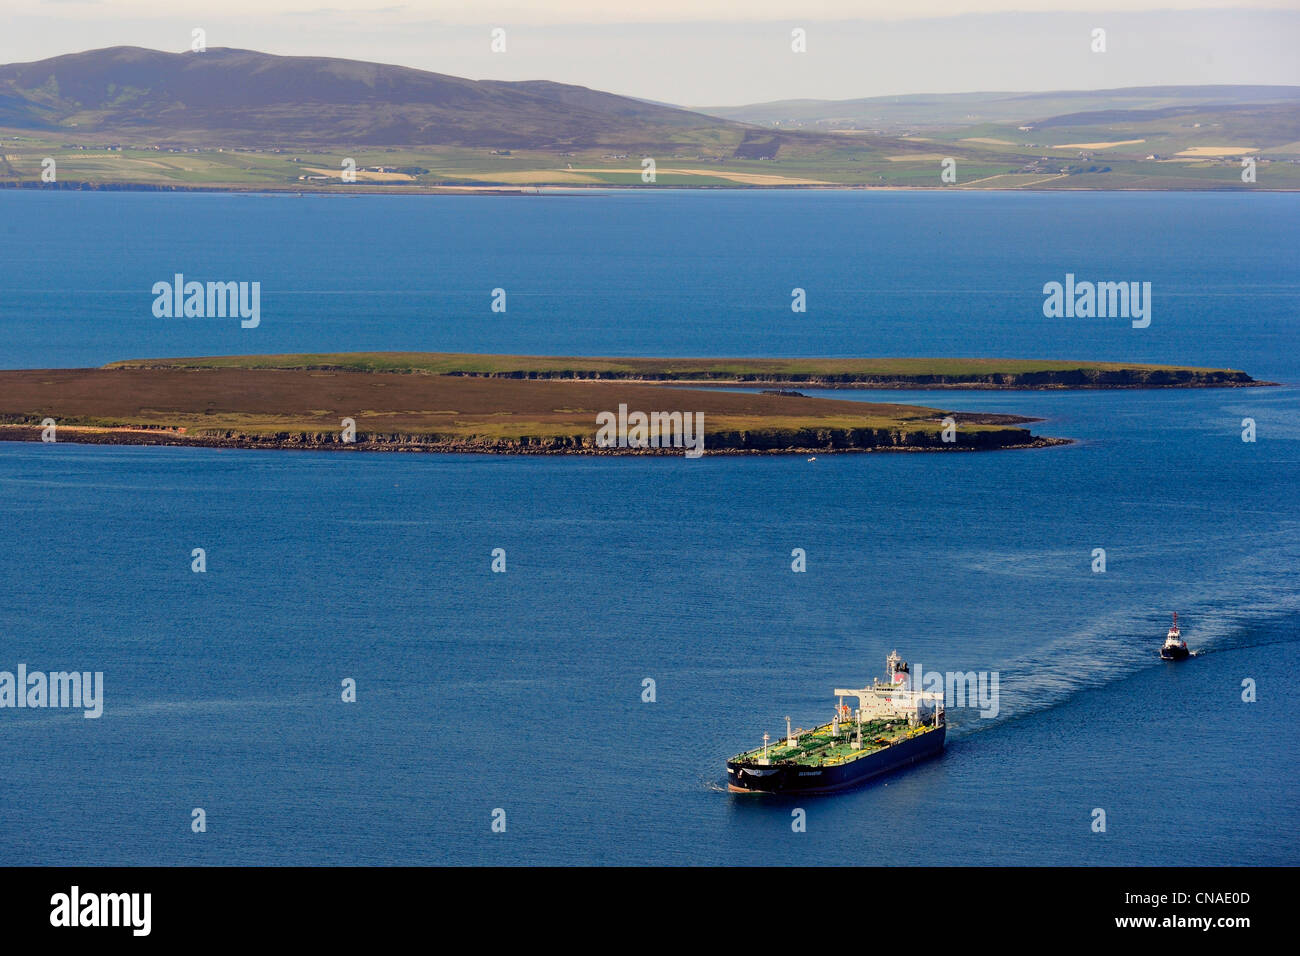 United Kingdom, Scotland, Orkney Islands, tanker navigating in Scapa Flow off the island of Flotta and the island of Mainland Stock Photo